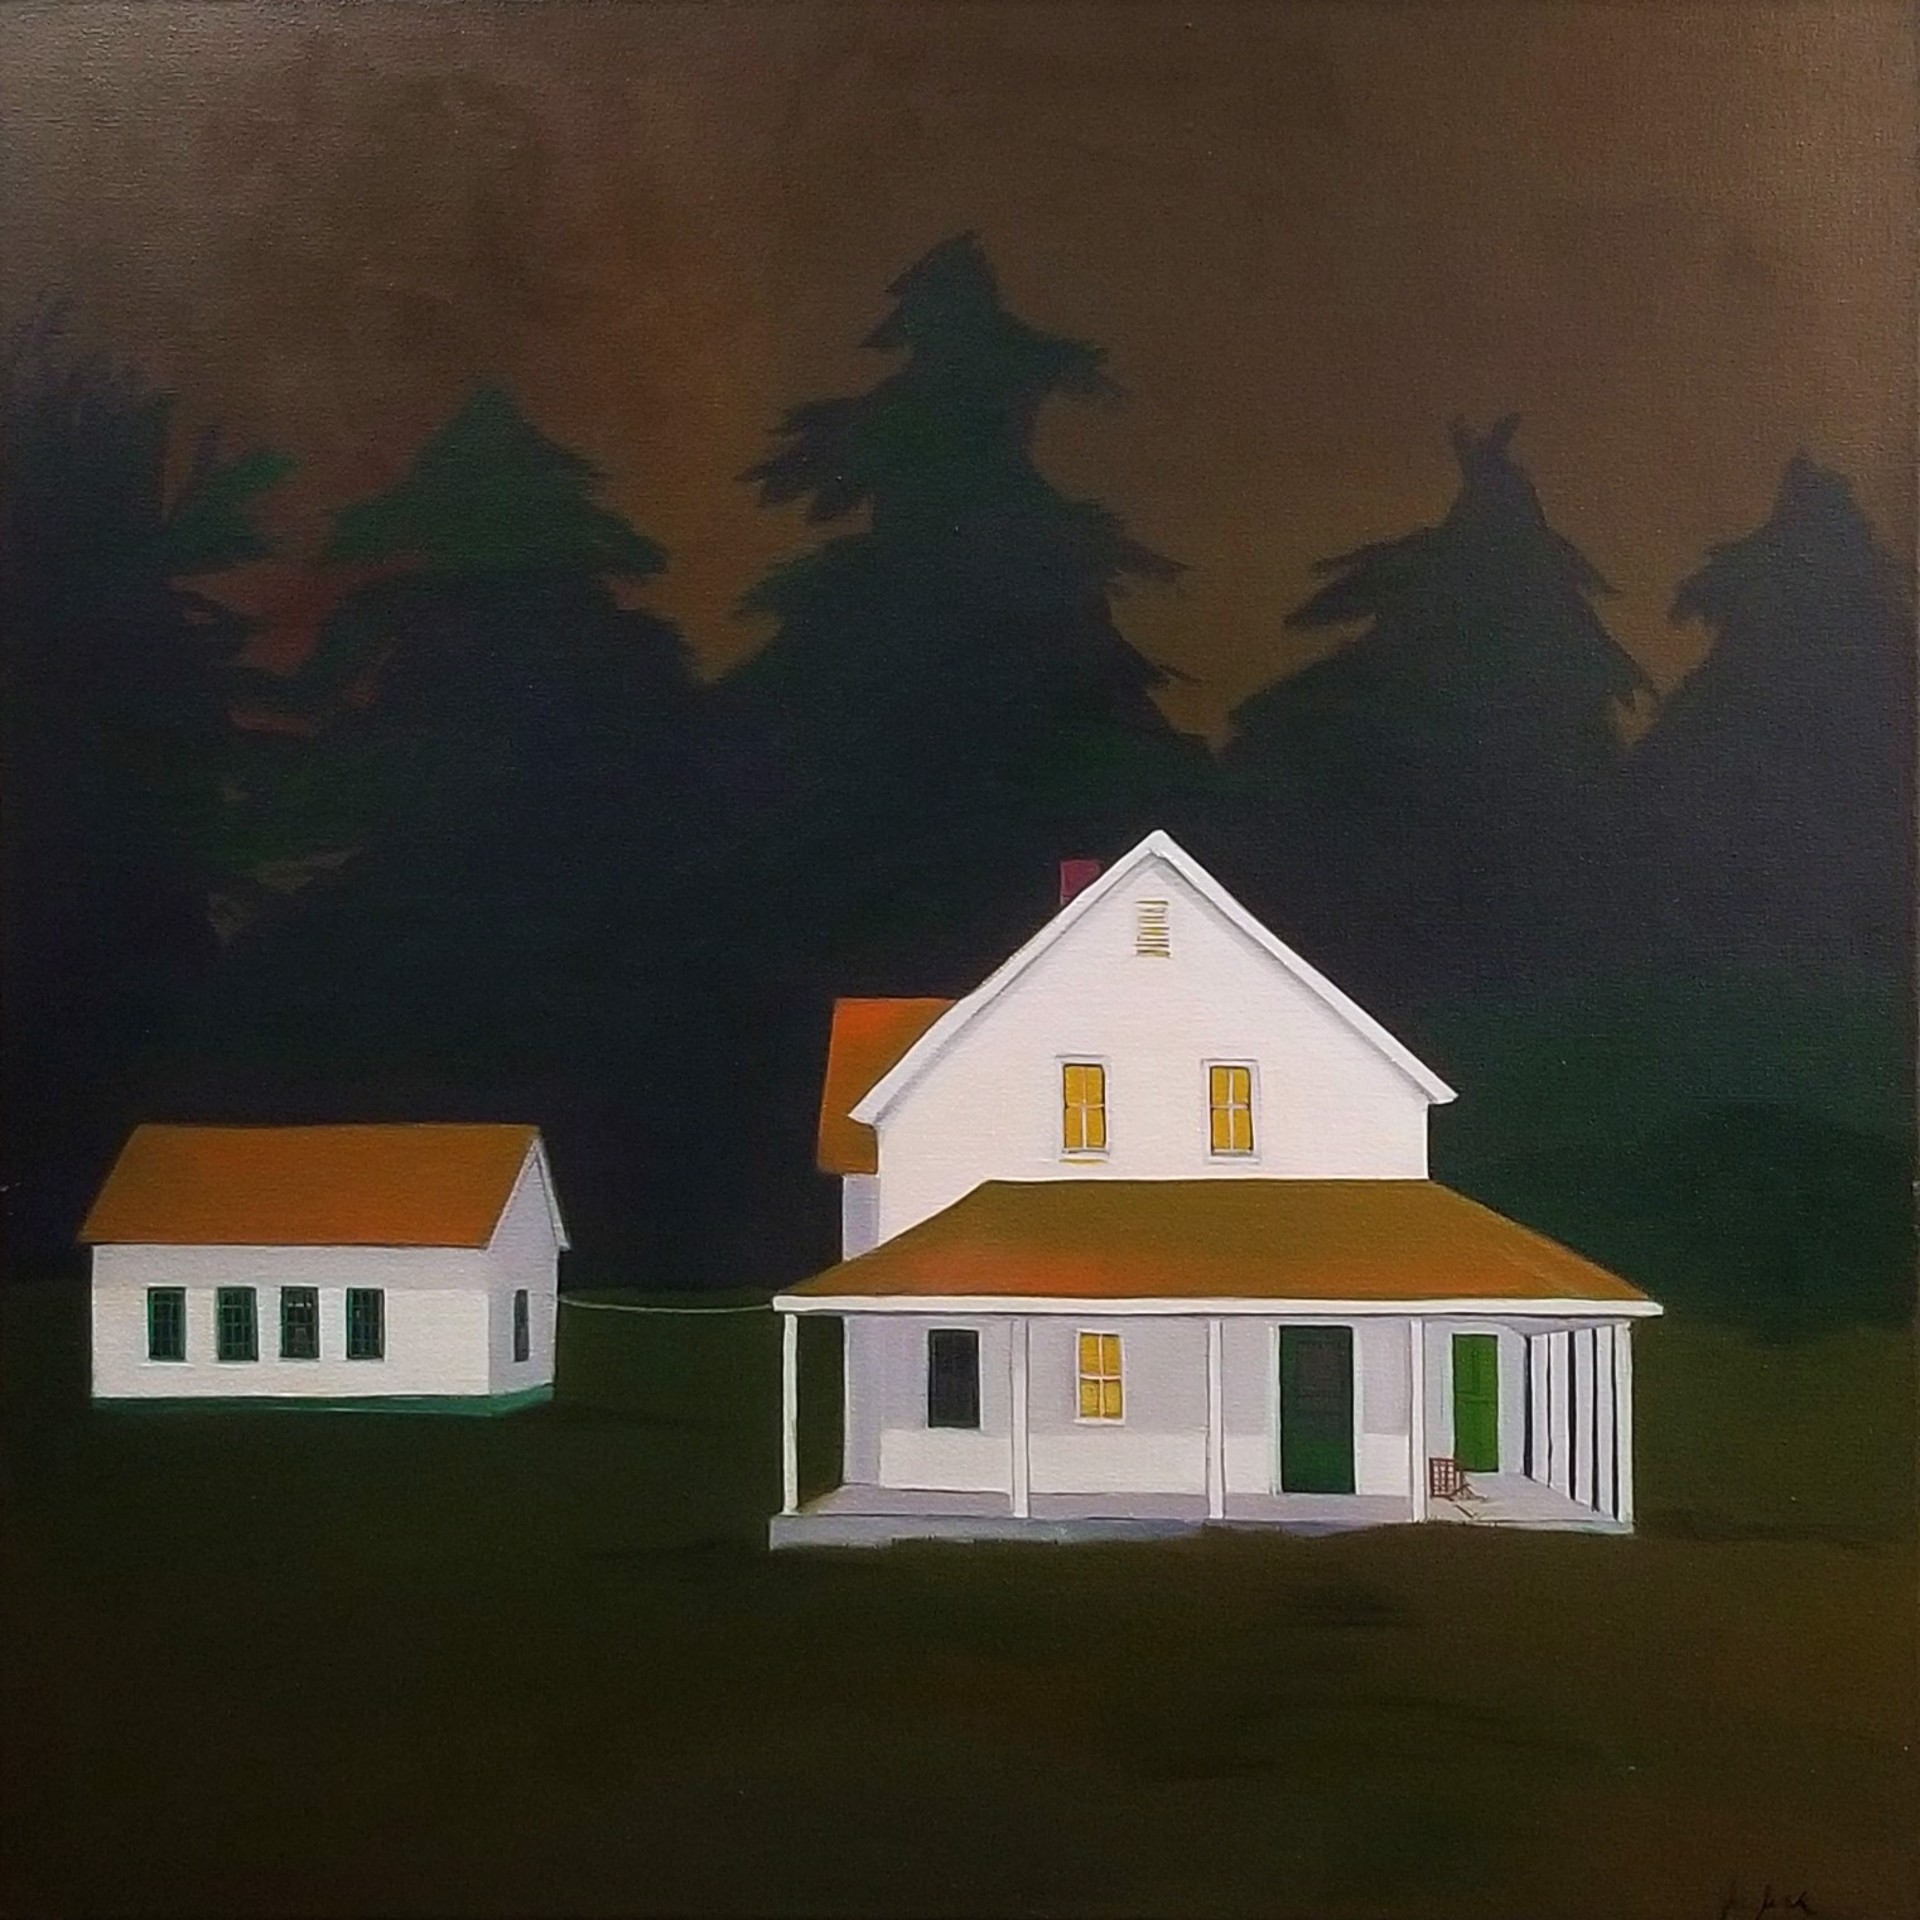 HOUSE AT THE END OF THE ROAD by JEAN JACK